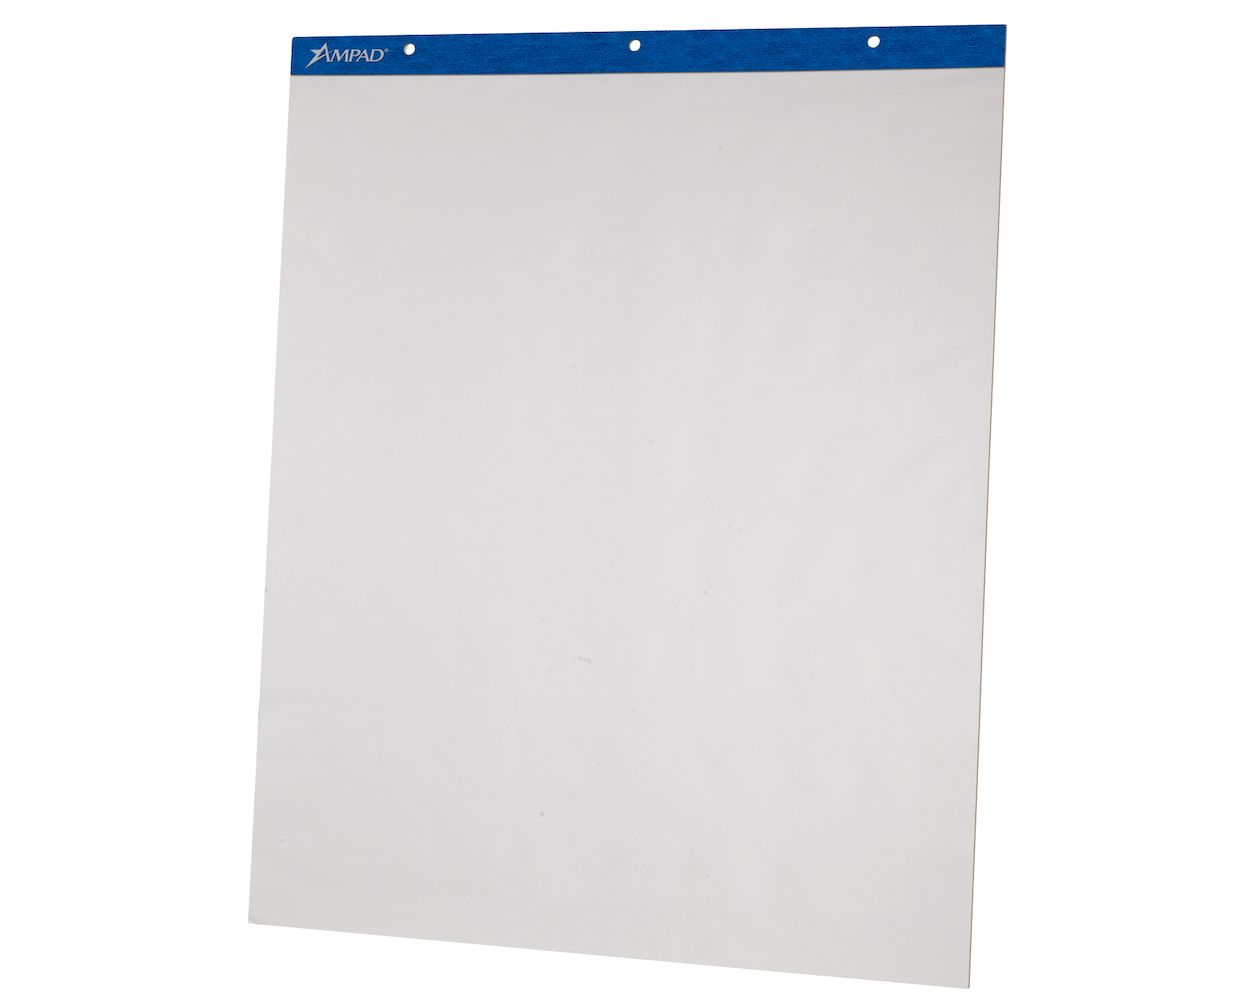 Easel Pad - 27 x 34, Unruled, NSN 7530-00-619-8880 - The ArmyProperty  Store